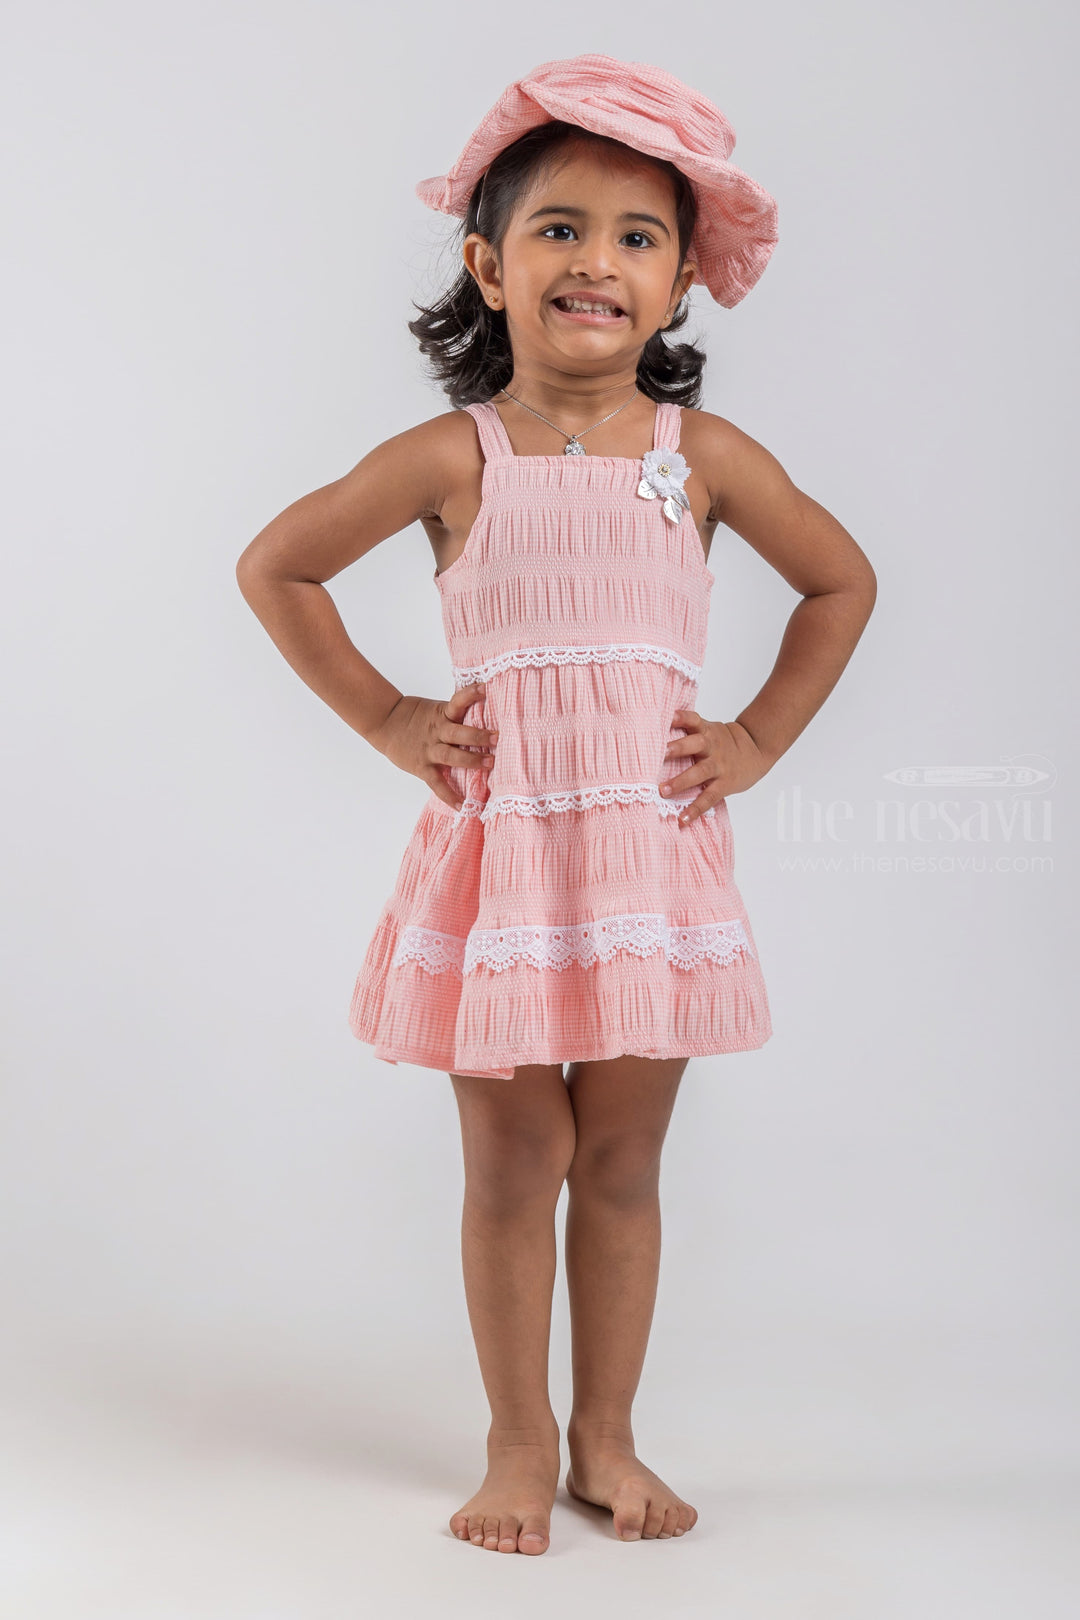 The Nesavu Baby Cotton Frocks Salmon Pink Sleeveless Layered Cotton Frock with Embellished Lace and Flower Applique for Baby Girls and Cap psr silks Nesavu